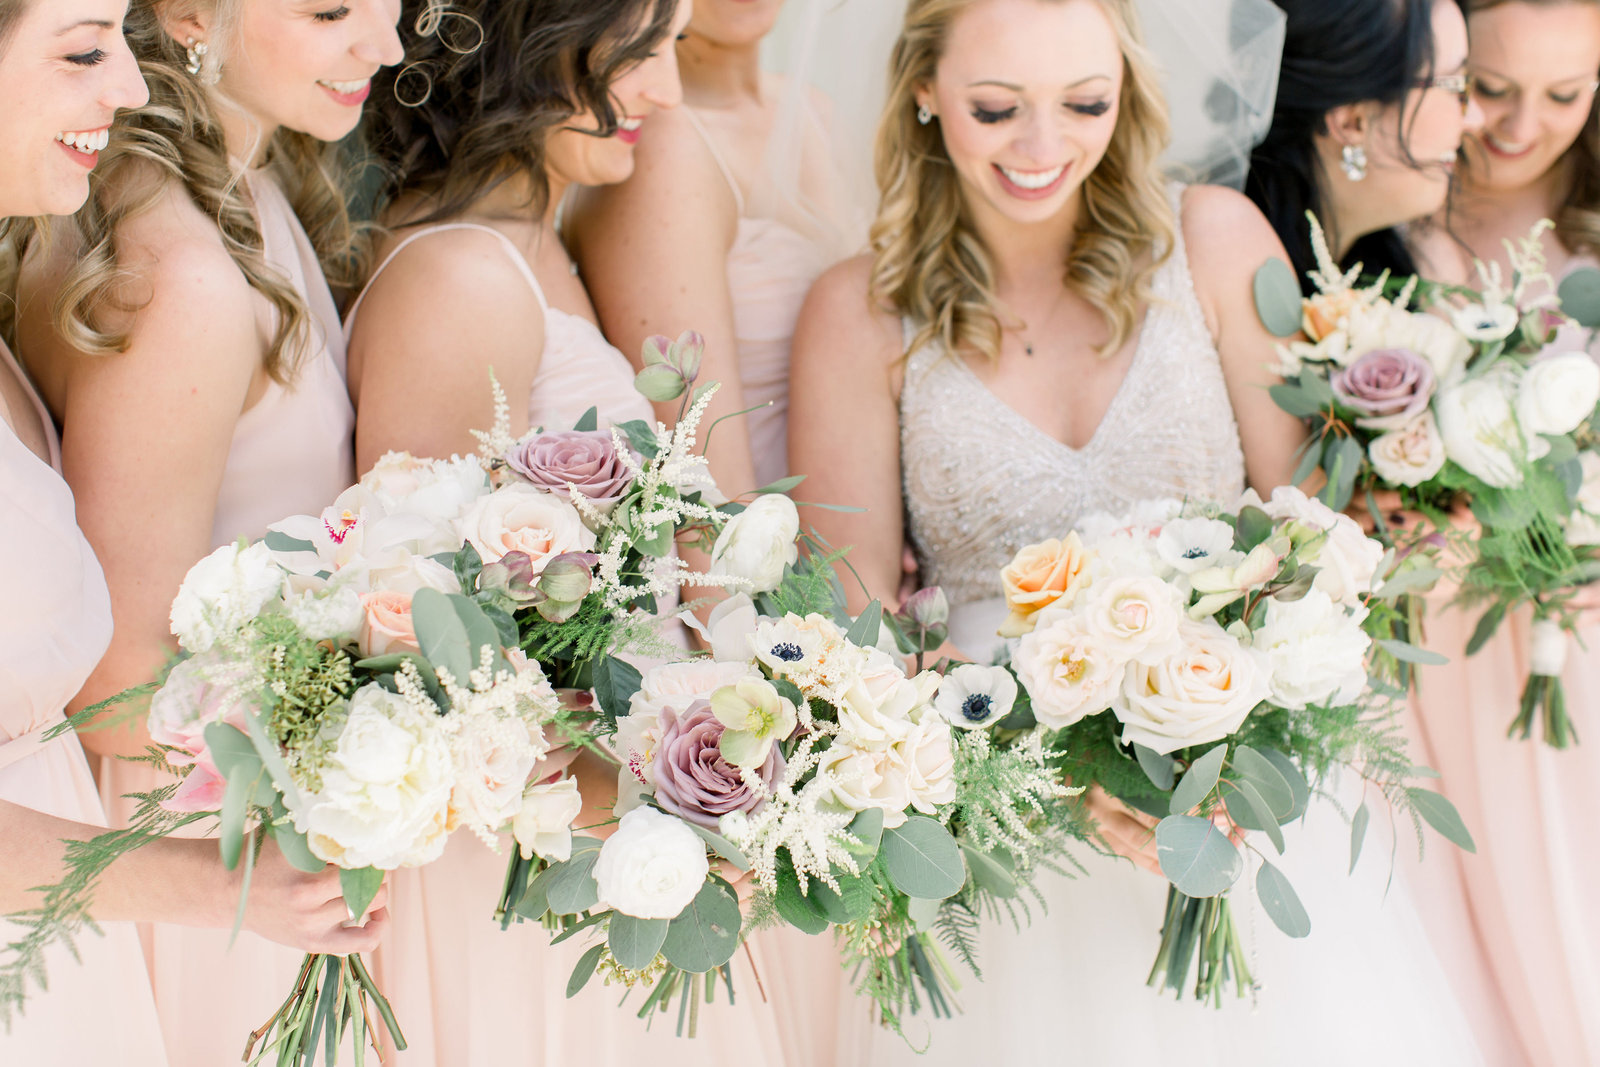 Bridesmaids and bride holding blush wedding bouquets